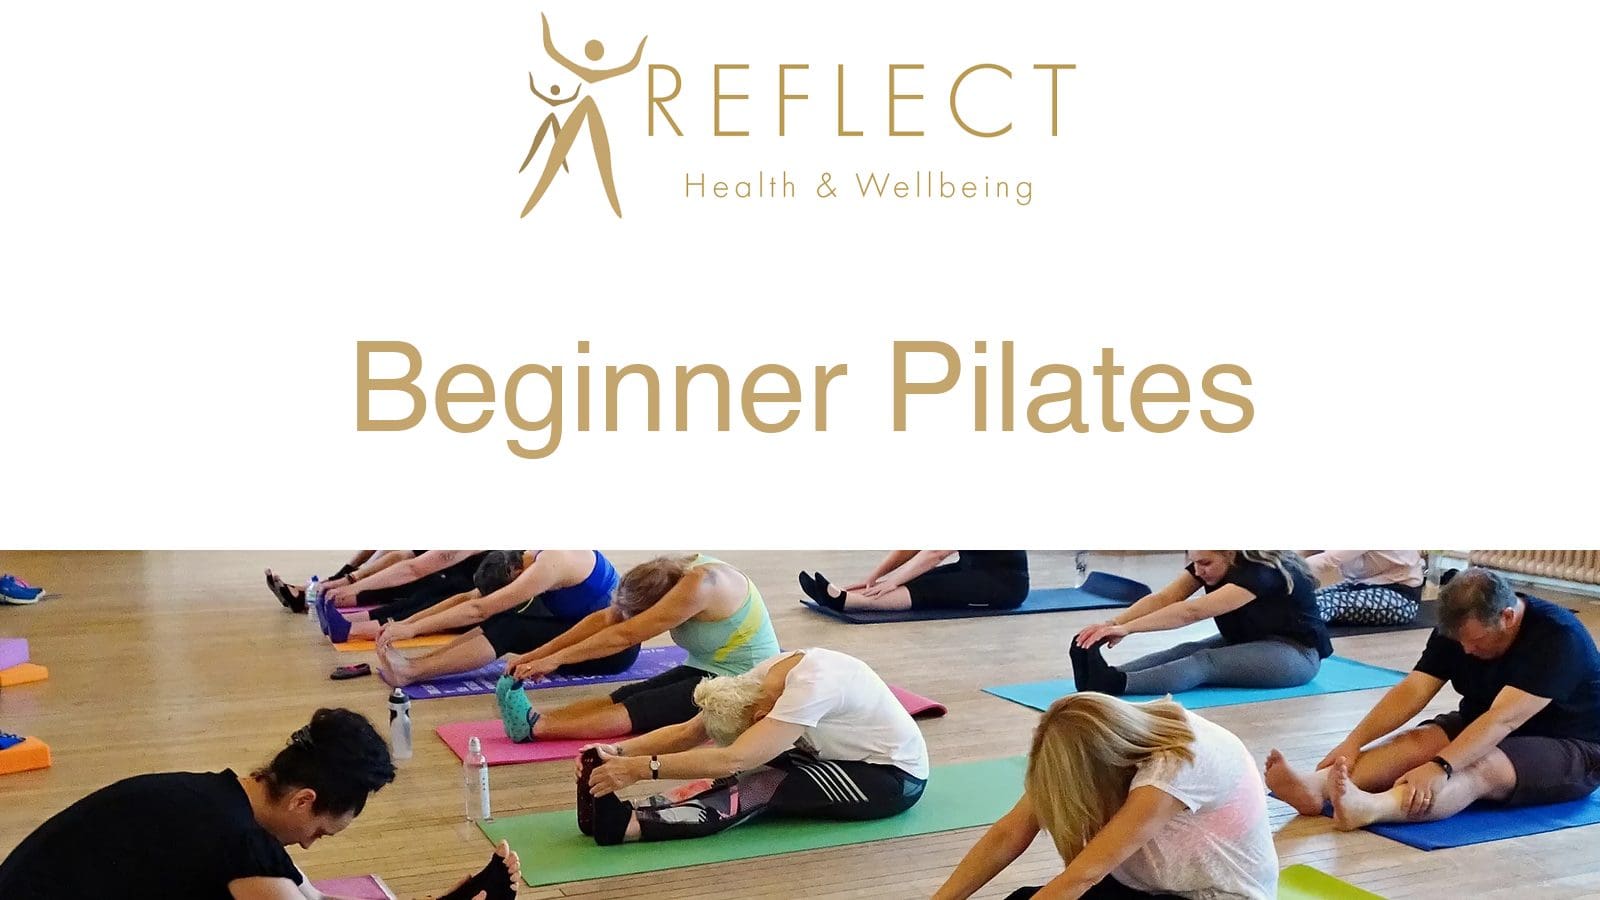 Beginner Pilates with Reflect Health and Wellbeing - Thetford